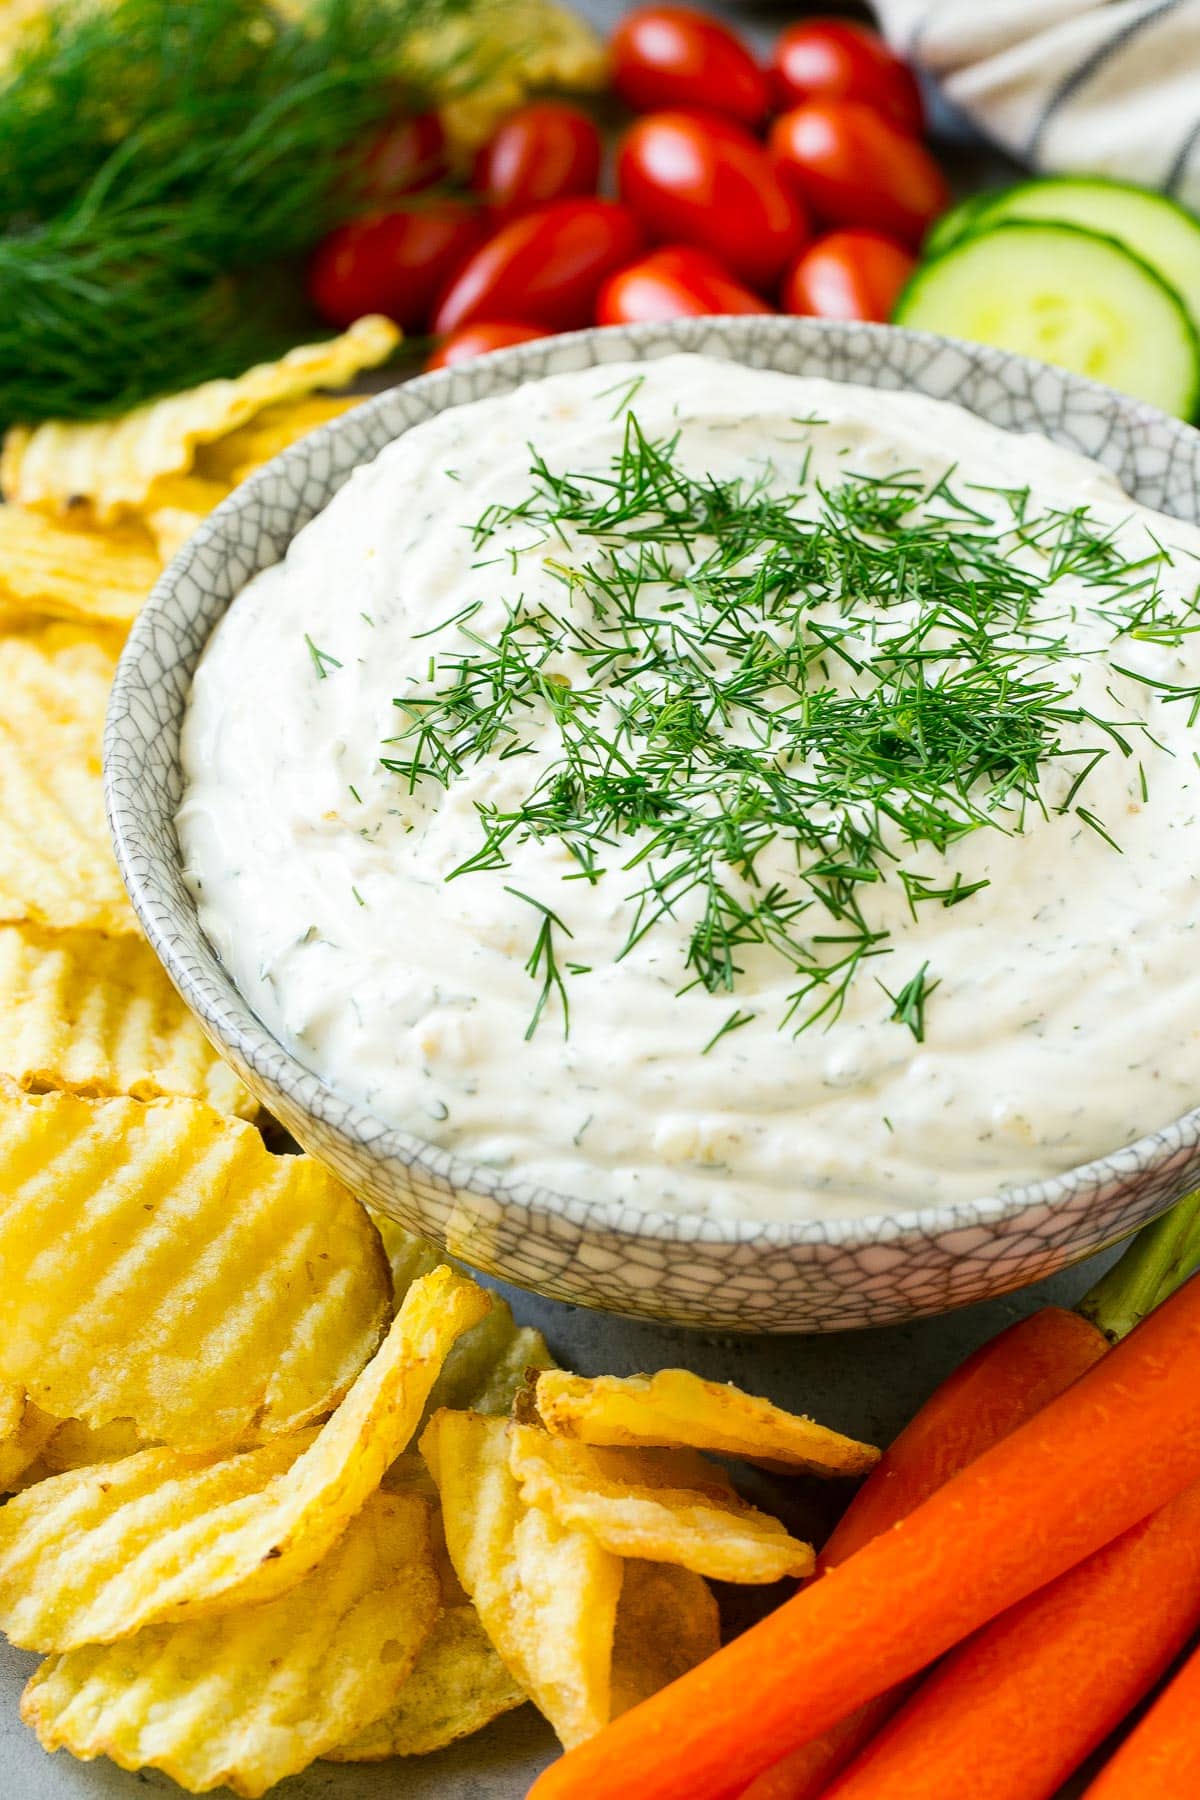 A side view of a bowl of dill dip served with potato chips, carrots and cucumbers.